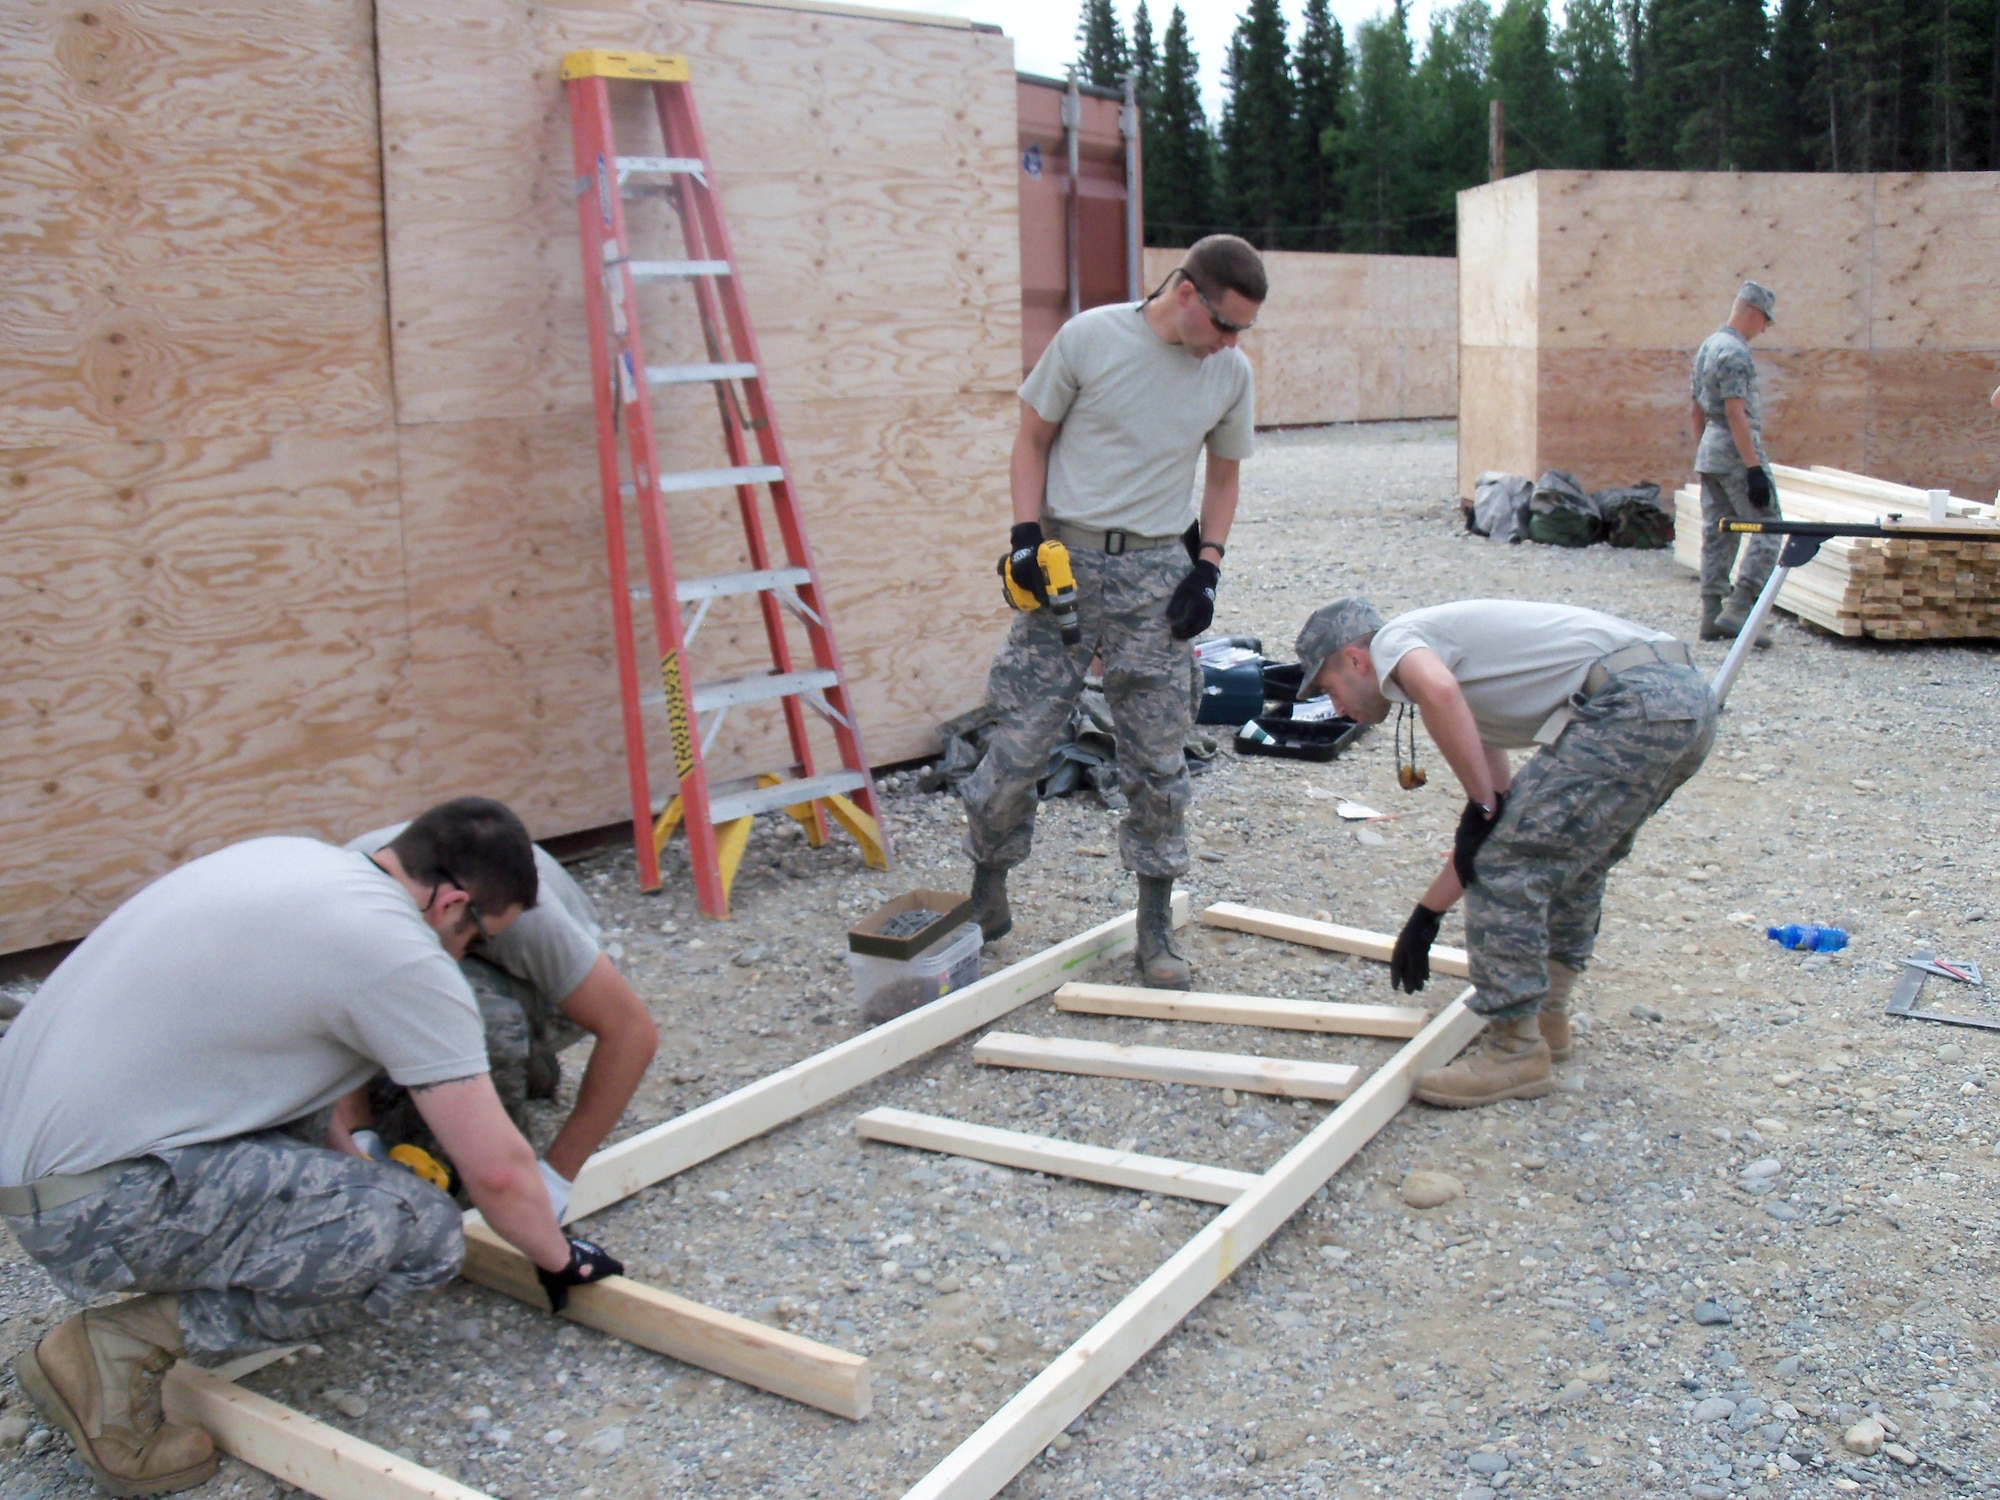 148th Fighter Wing Civil Engineering Squadron members Staff Sgt. Tom Jackson, Staff Sgt. Michael Wing, Senior Airman Brent Micken, and Airman 1st Class Jacob Olson construct part of asimulated village at Fort Greely, Delta Junction, Alaska July 23, 2011. The Army will use the village to train tactical movements and building clearing procedures. 